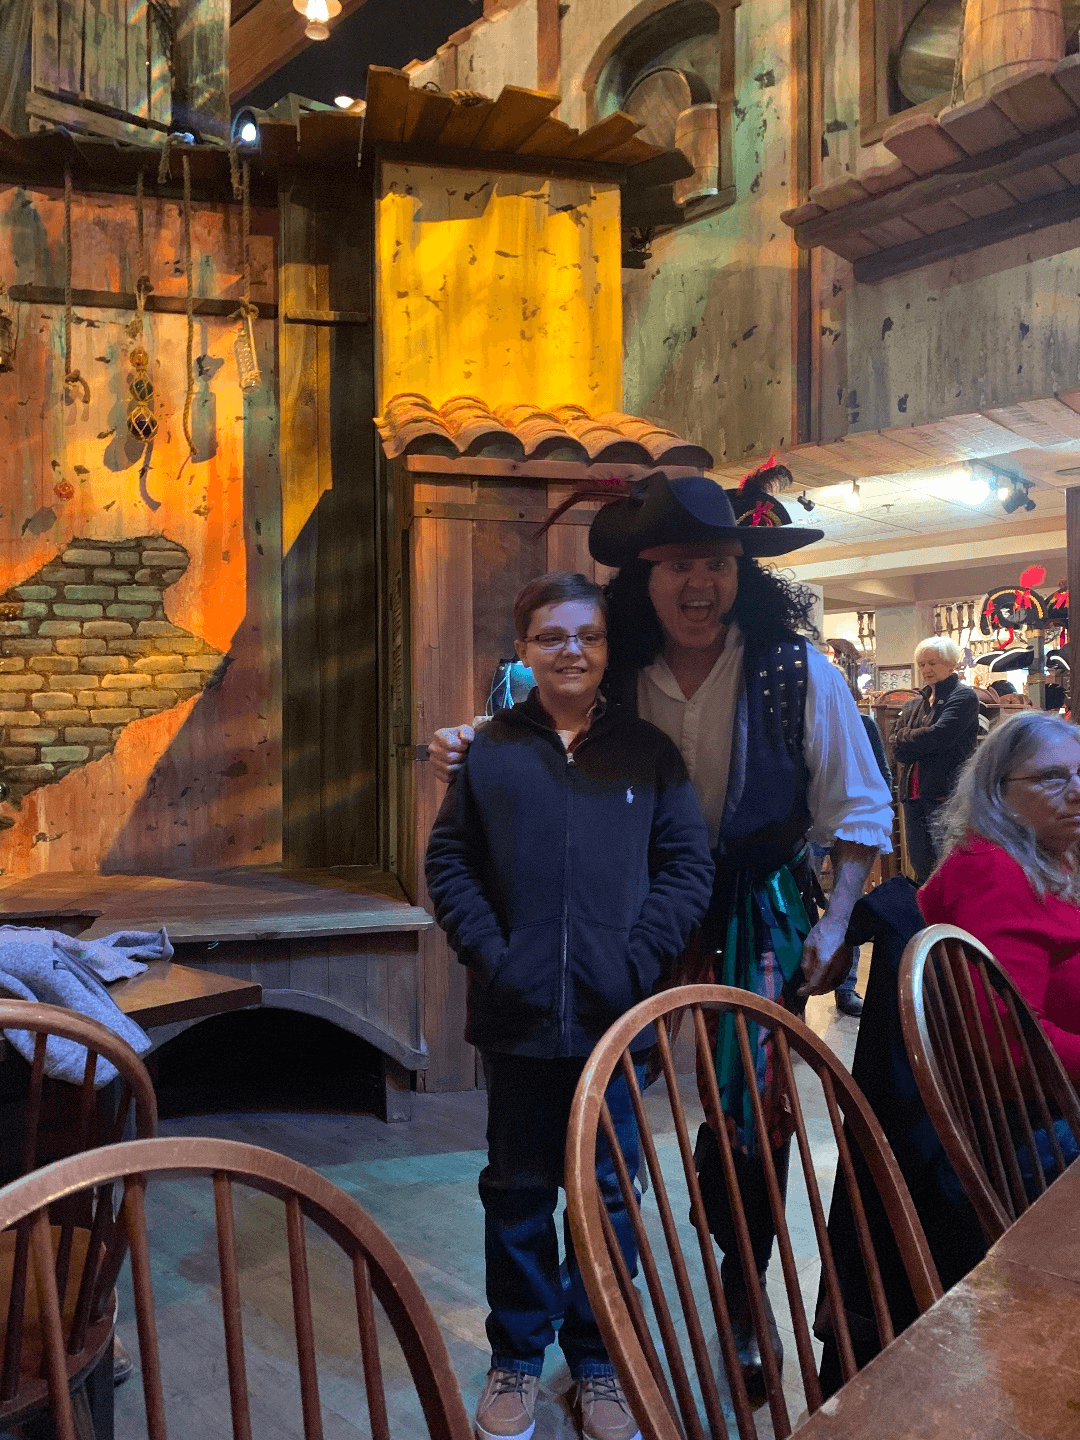 Christmas at Pirates Voyage Dinner Show Myrtle Beach, SC Tripster